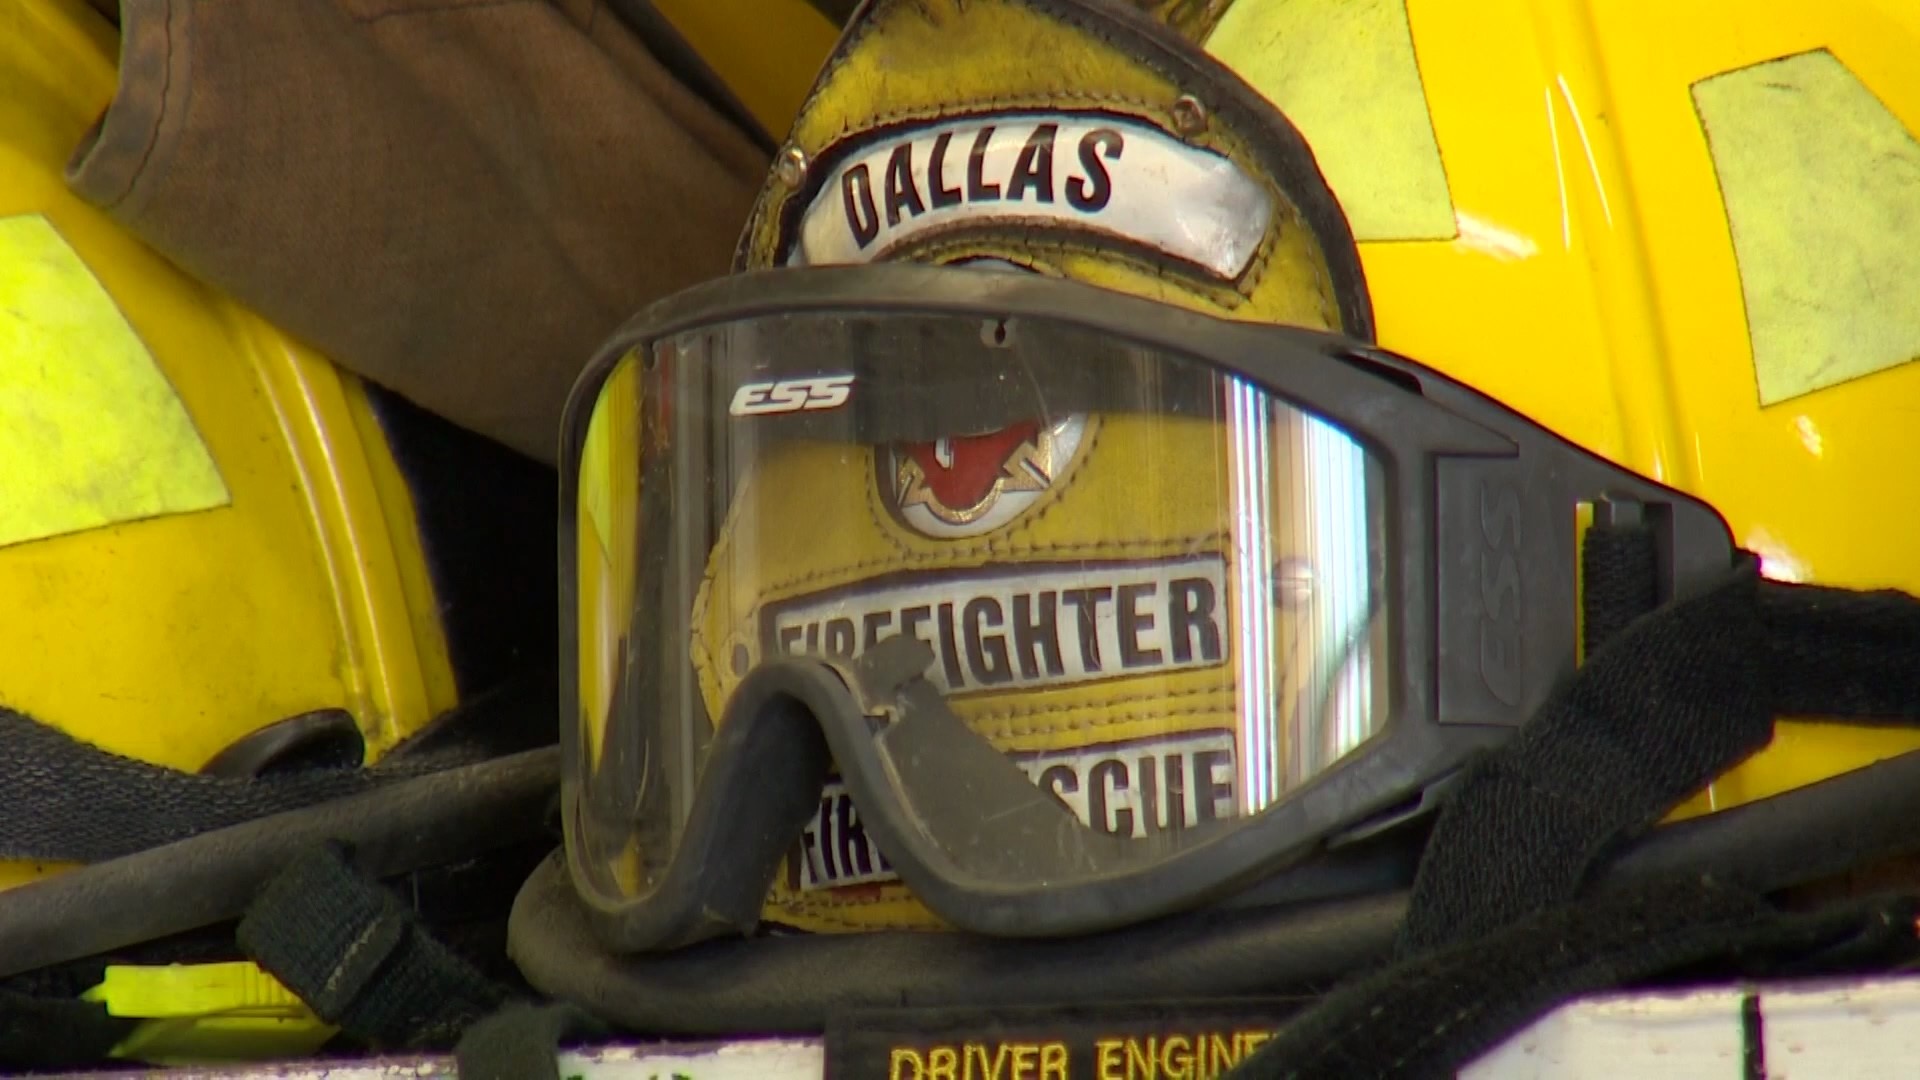 According to Dallas Fire-Rescue, six Dallas firefighters have attempted suicide since 2018. Four of them died.